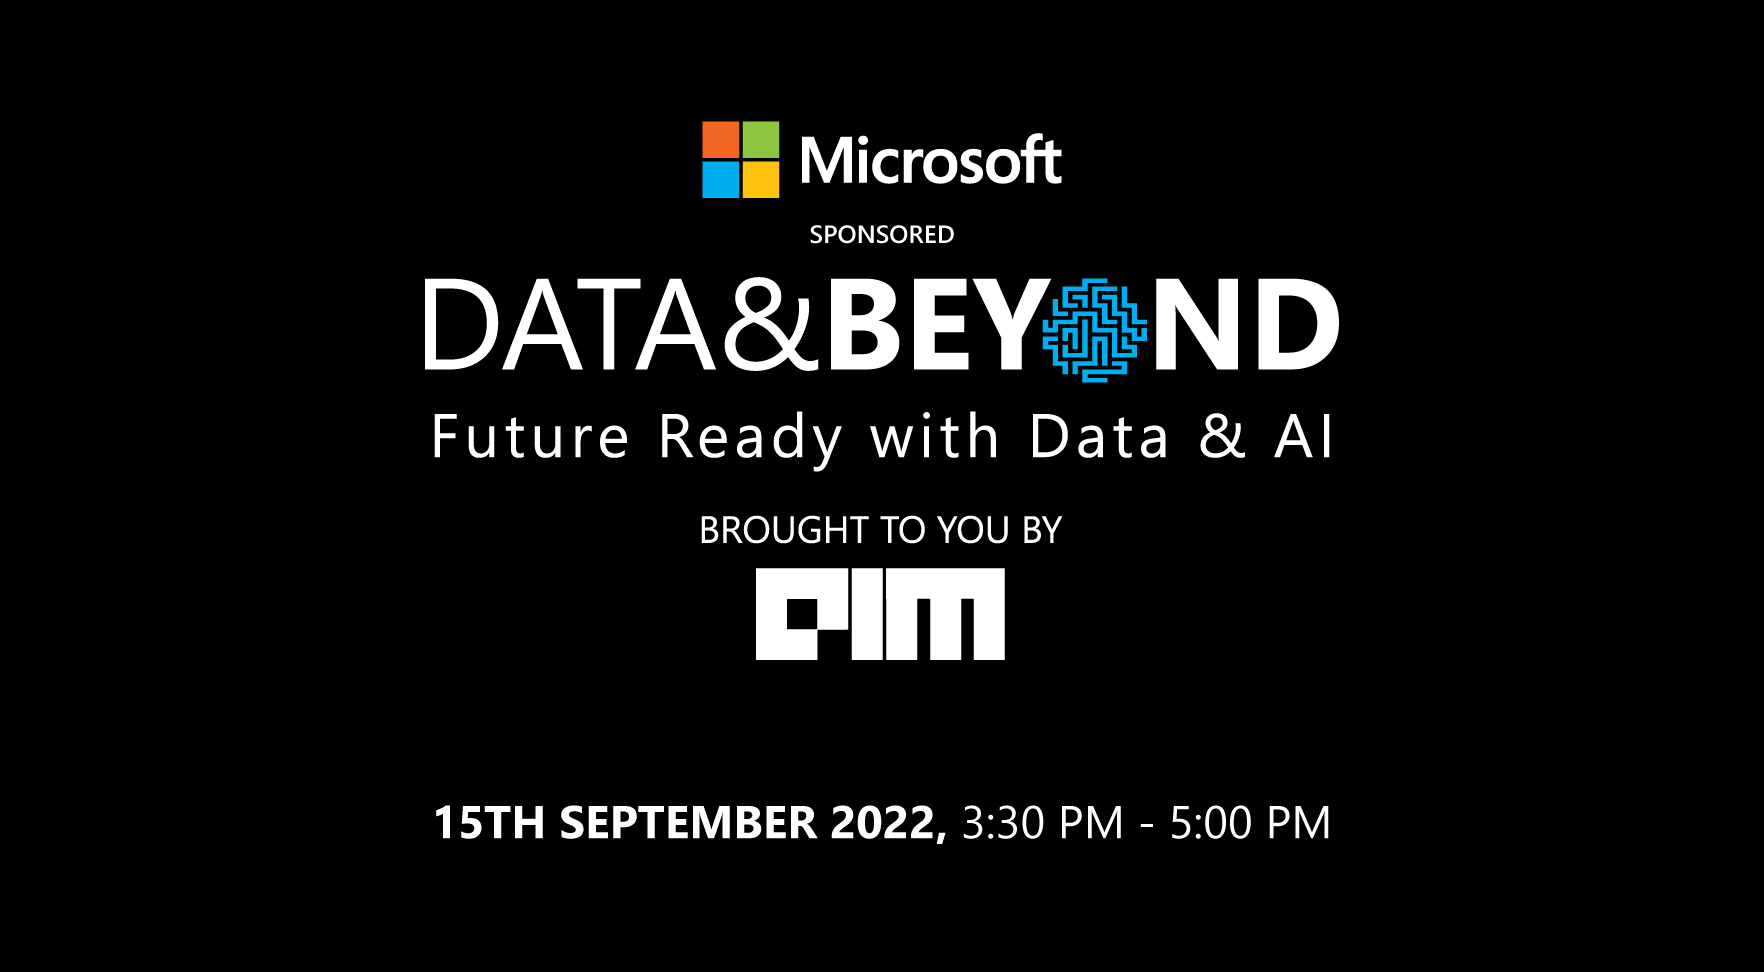 Join us for Data&Beyond 2022, in association with Microsoft: A virtual CDO panel discussion on becoming future-ready with data & AI